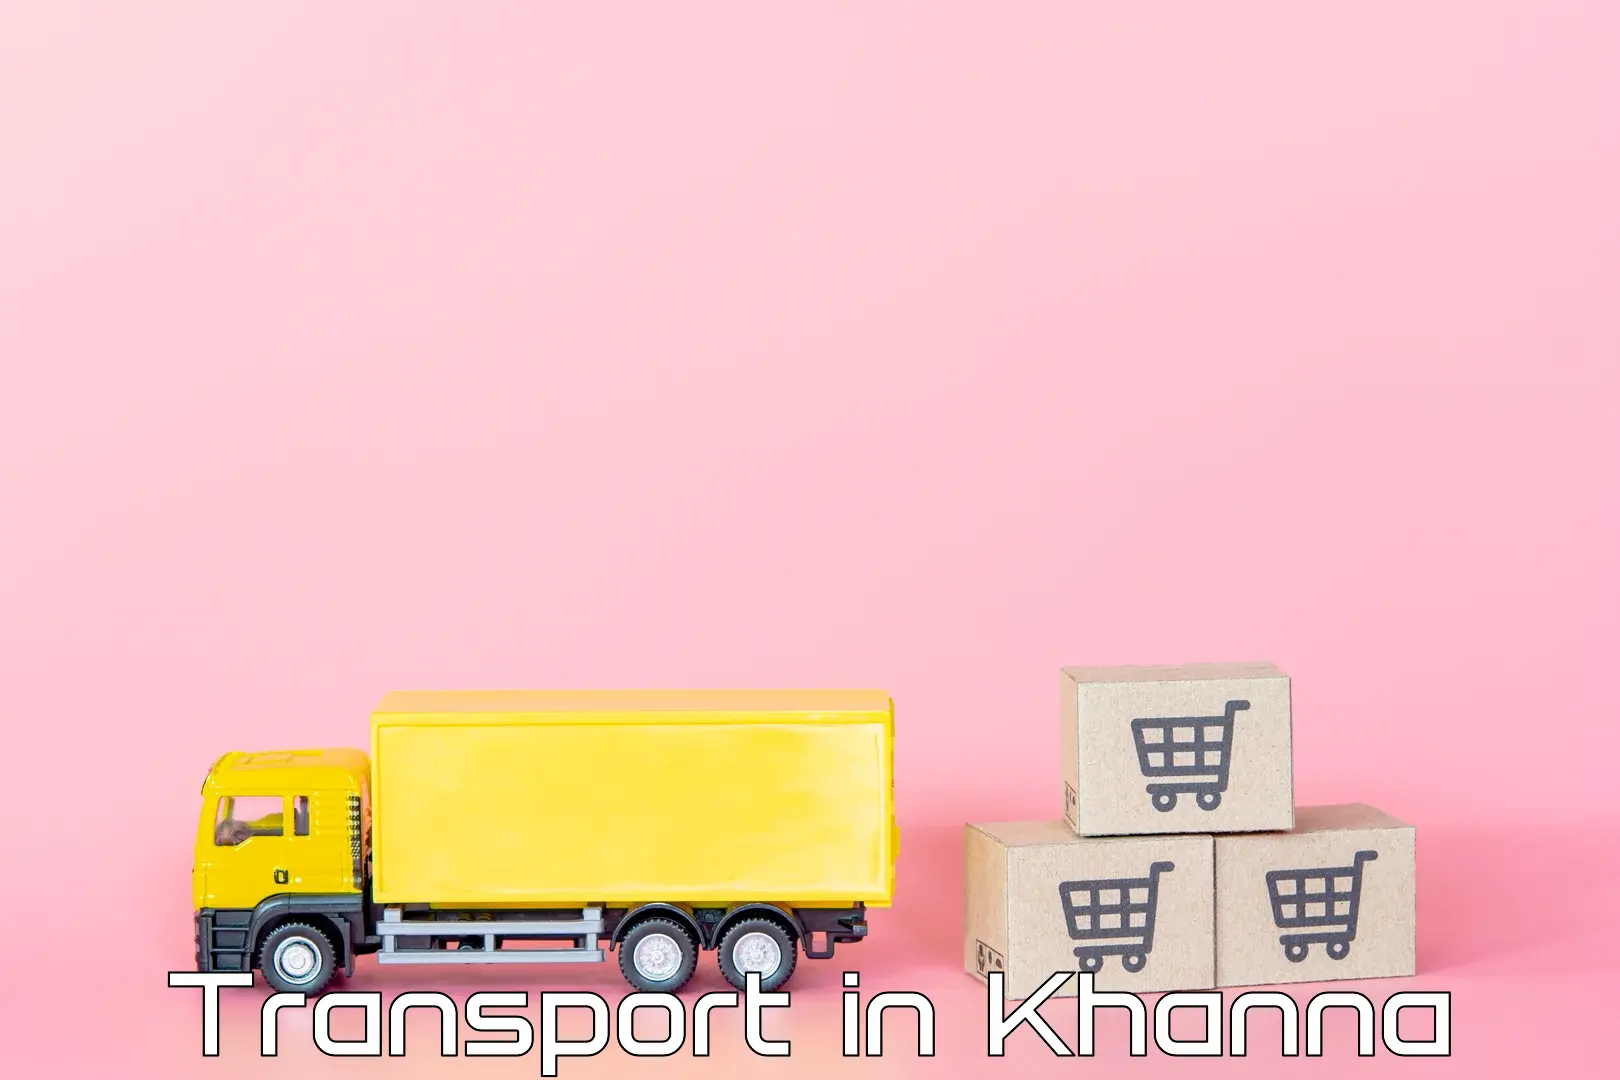 Lorry transport service in Khanna